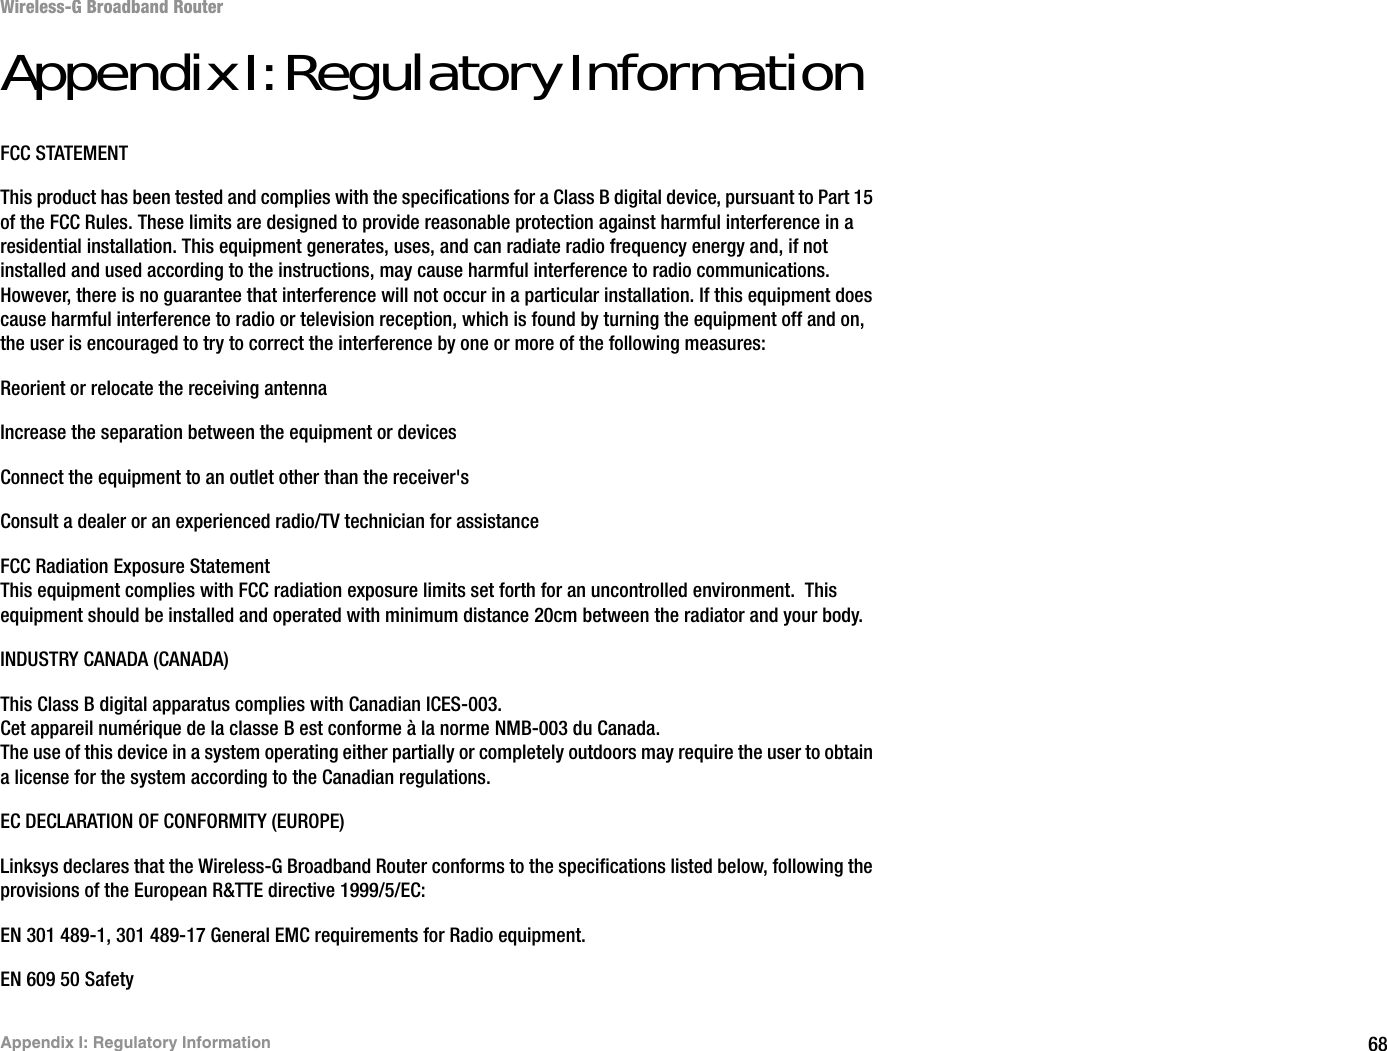 68Appendix I: Regulatory InformationWireless-G Broadband RouterAppendix I: Regulatory InformationFCC STATEMENTThis product has been tested and complies with the specifications for a Class B digital device, pursuant to Part 15 of the FCC Rules. These limits are designed to provide reasonable protection against harmful interference in a residential installation. This equipment generates, uses, and can radiate radio frequency energy and, if not installed and used according to the instructions, may cause harmful interference to radio communications. However, there is no guarantee that interference will not occur in a particular installation. If this equipment does cause harmful interference to radio or television reception, which is found by turning the equipment off and on, the user is encouraged to try to correct the interference by one or more of the following measures:Reorient or relocate the receiving antennaIncrease the separation between the equipment or devicesConnect the equipment to an outlet other than the receiver&apos;sConsult a dealer or an experienced radio/TV technician for assistanceFCC Radiation Exposure StatementThis equipment complies with FCC radiation exposure limits set forth for an uncontrolled environment.  This equipment should be installed and operated with minimum distance 20cm between the radiator and your body.INDUSTRY CANADA (CANADA)This Class B digital apparatus complies with Canadian ICES-003.Cet appareil numérique de la classe B est conforme à la norme NMB-003 du Canada.The use of this device in a system operating either partially or completely outdoors may require the user to obtain a license for the system according to the Canadian regulations.EC DECLARATION OF CONFORMITY (EUROPE)Linksys declares that the Wireless-G Broadband Router conforms to the specifications listed below, following the provisions of the European R&amp;TTE directive 1999/5/EC: EN 301 489-1, 301 489-17 General EMC requirements for Radio equipment.EN 609 50 Safety